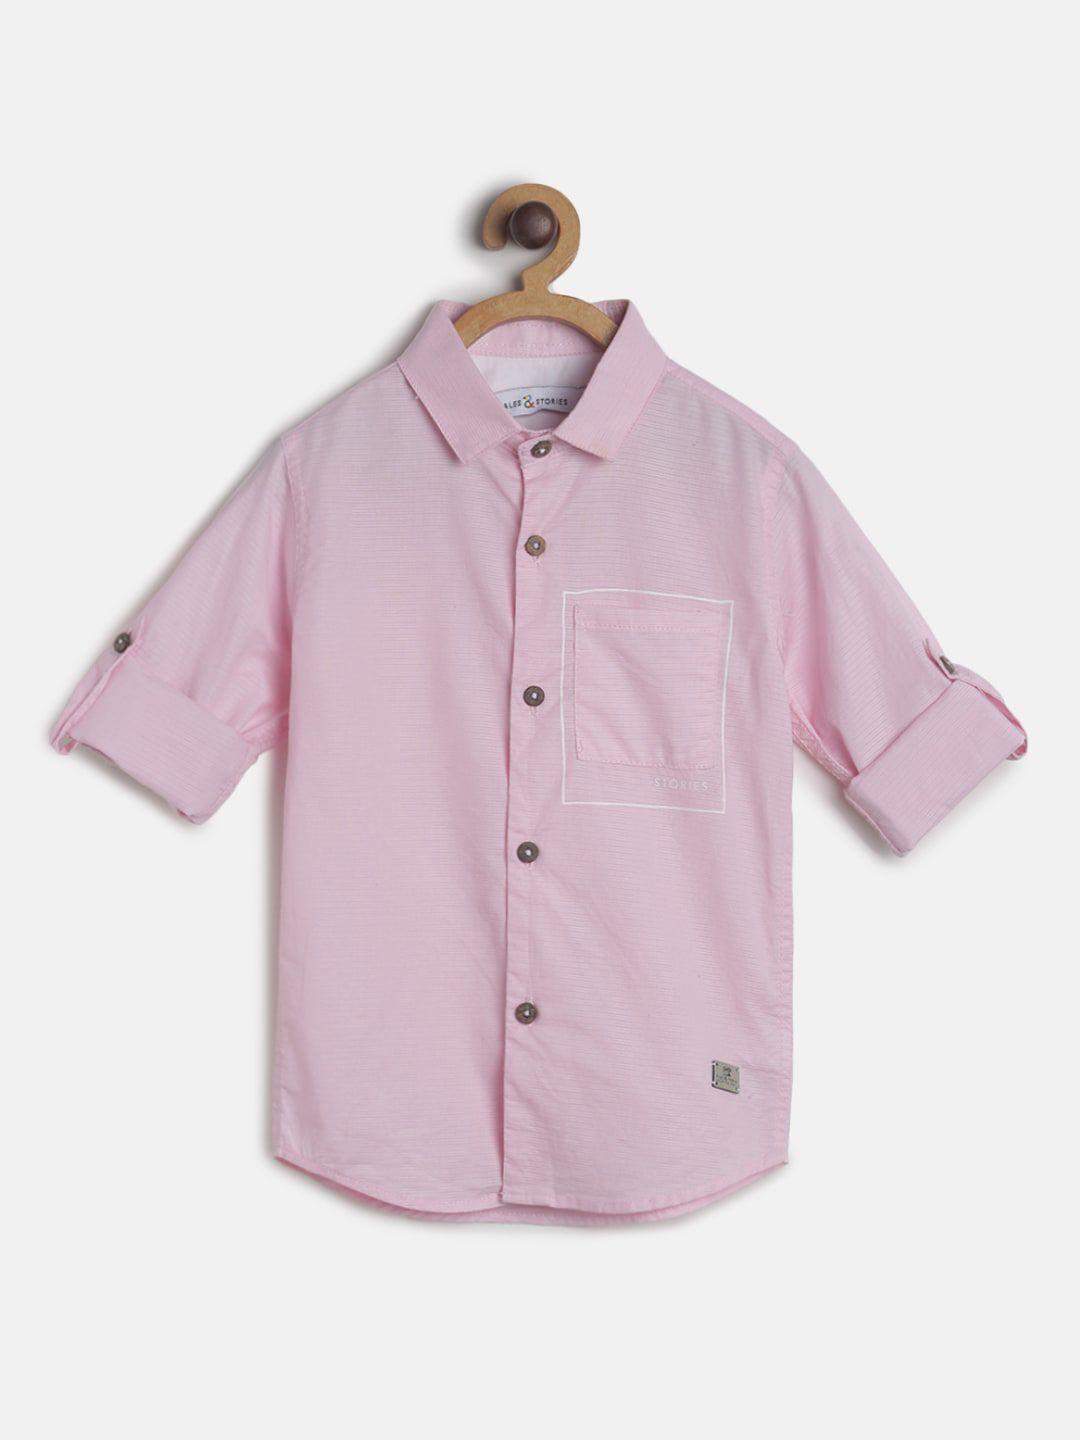 TALES & STORIES Boys Pink Regular Fit Solid Casual Shirt